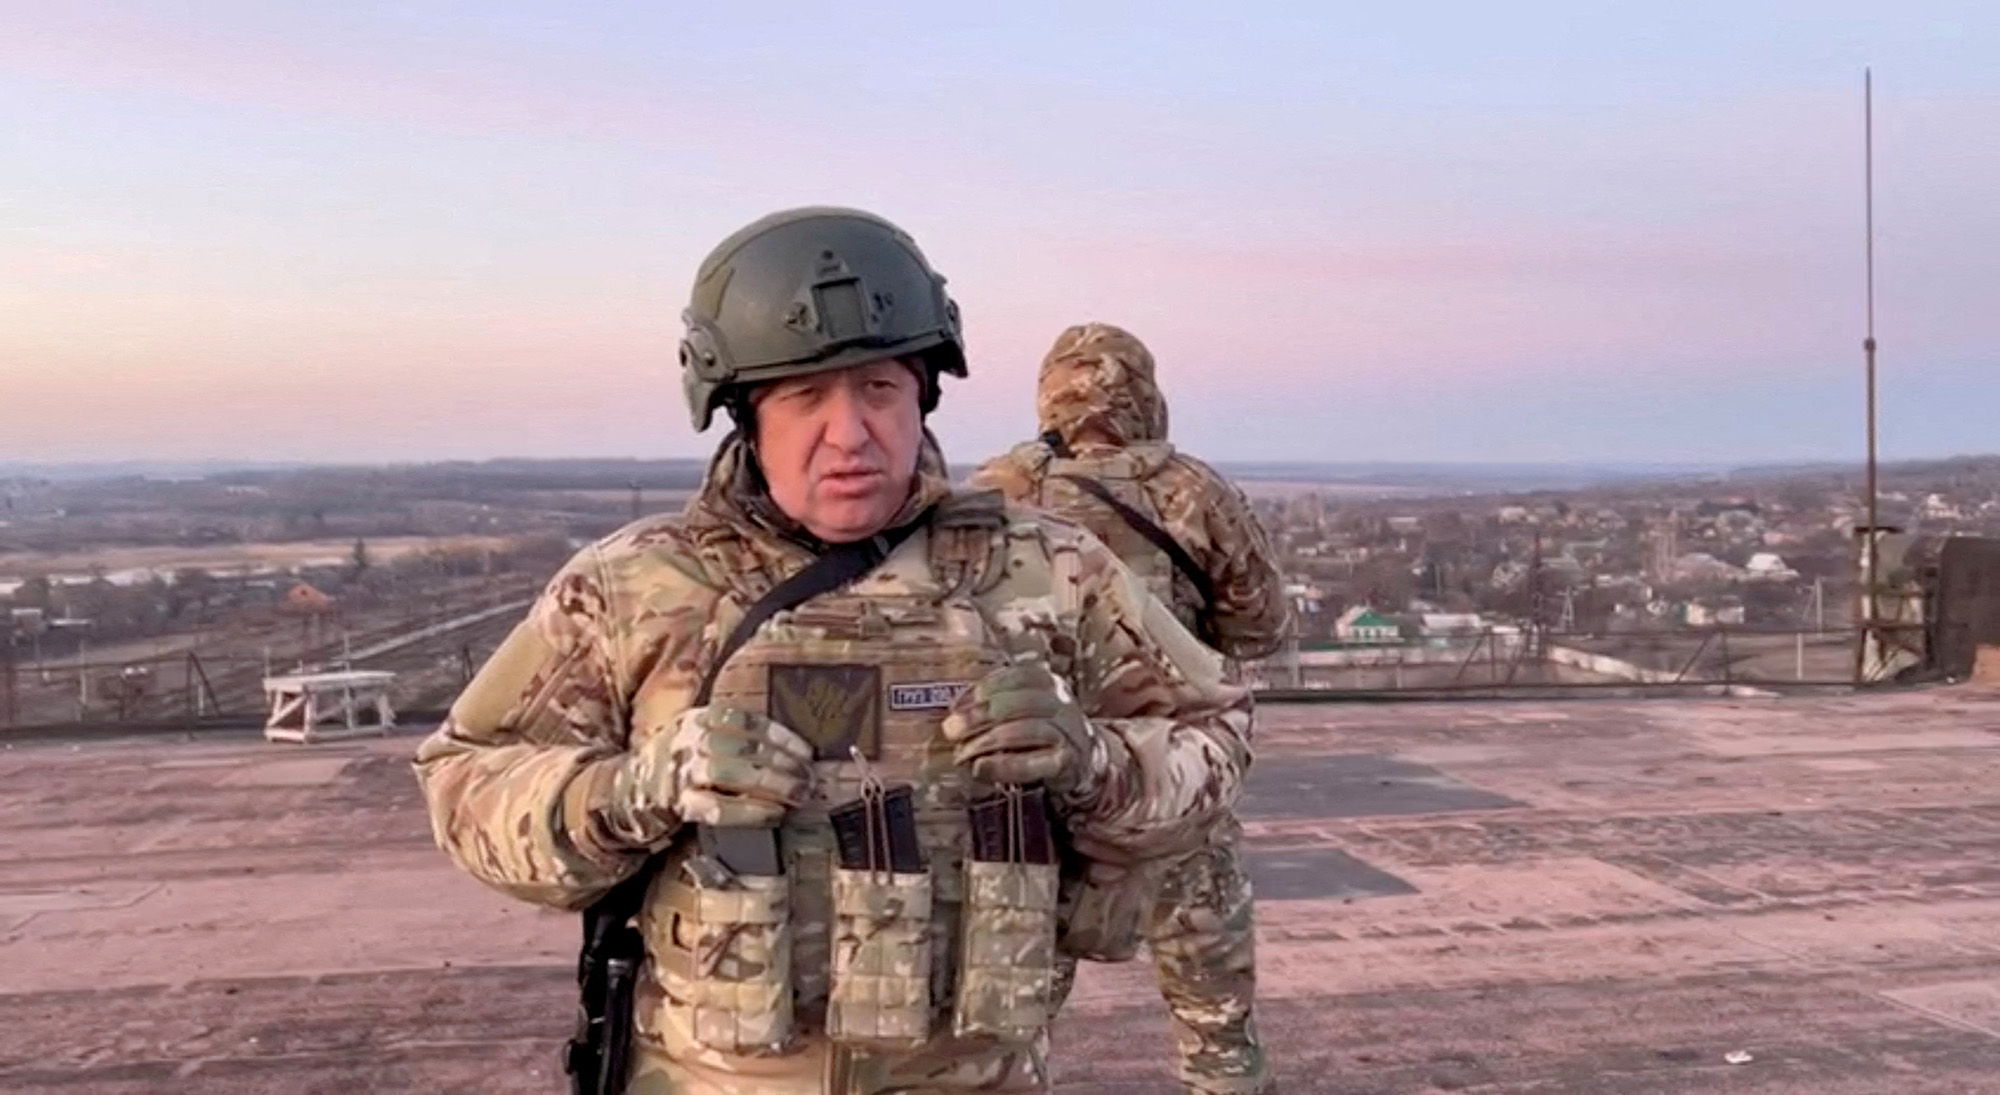 Yevgeny Prigozhin, founder of Russia's Wagner mercenary force, in Paraskoviivka, Ukraine, in this still image from an undated video released on March 3.